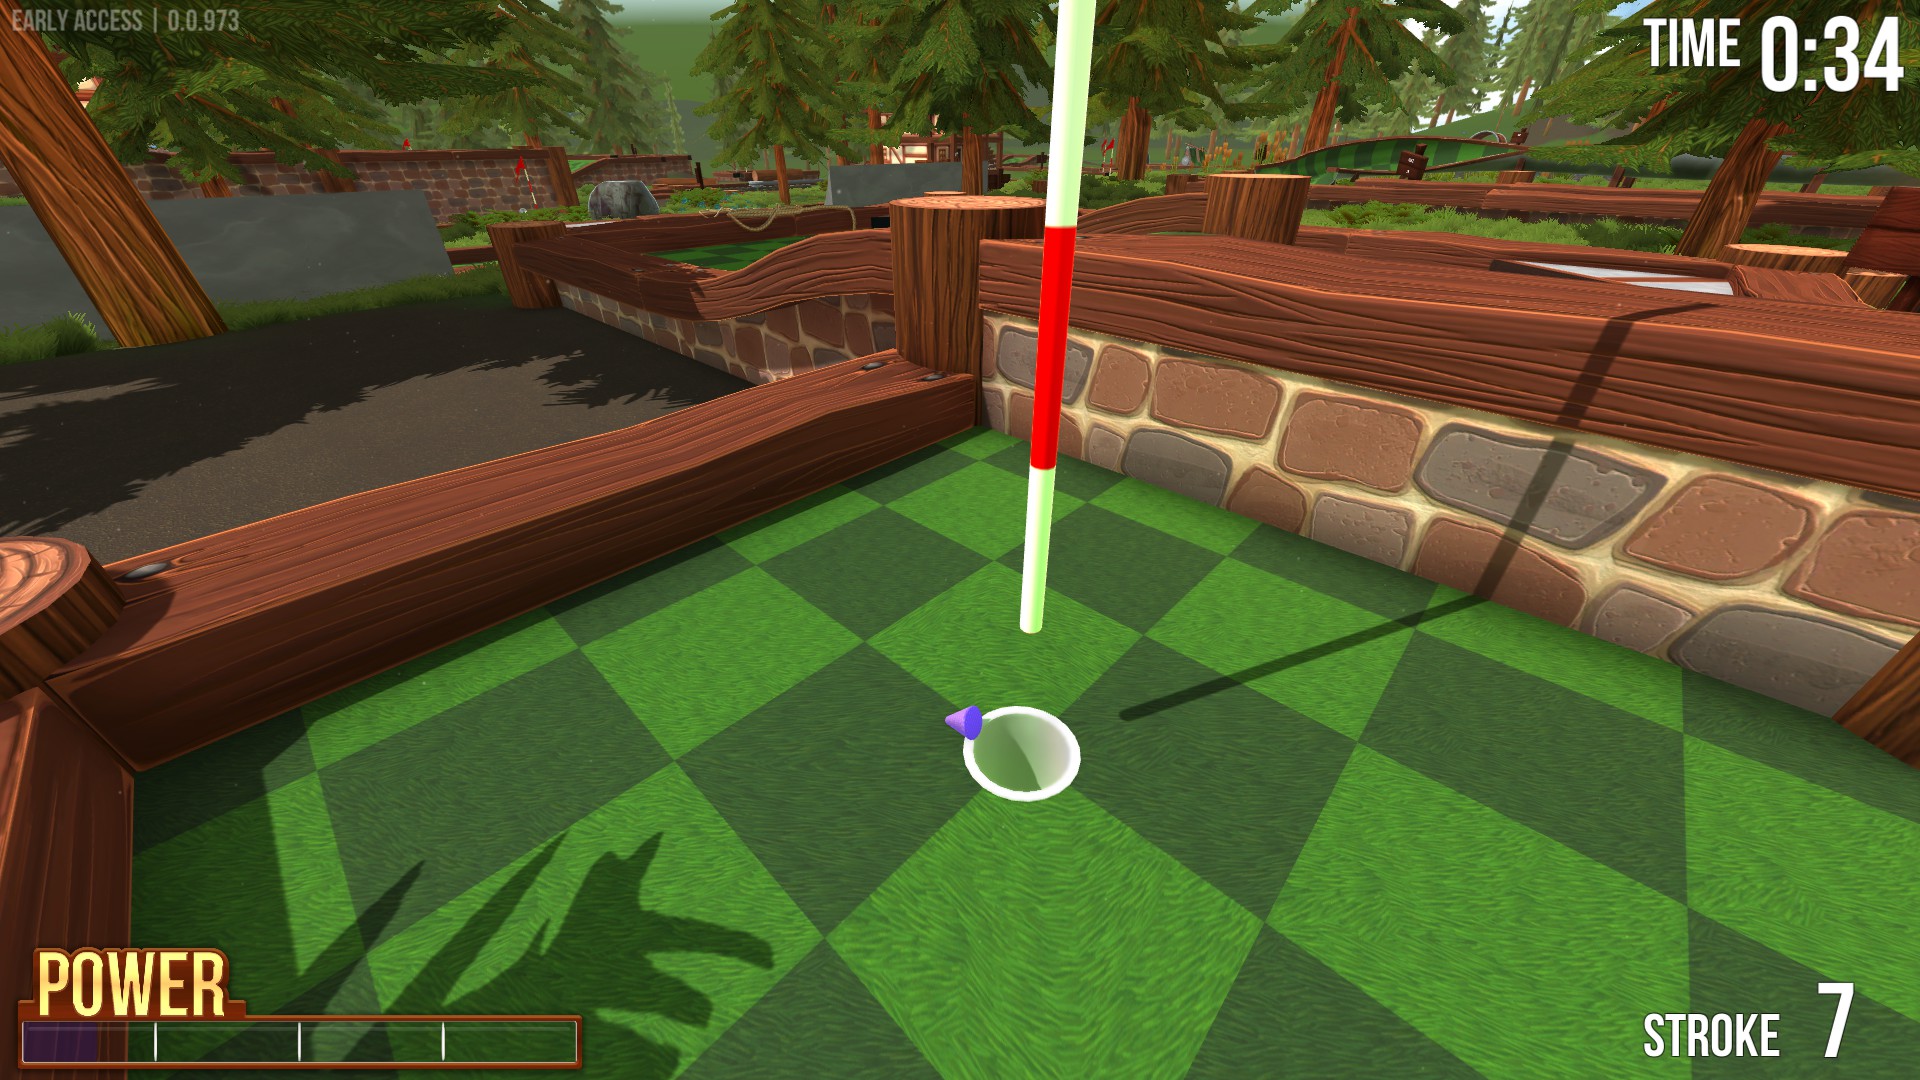 steam golf with your friends